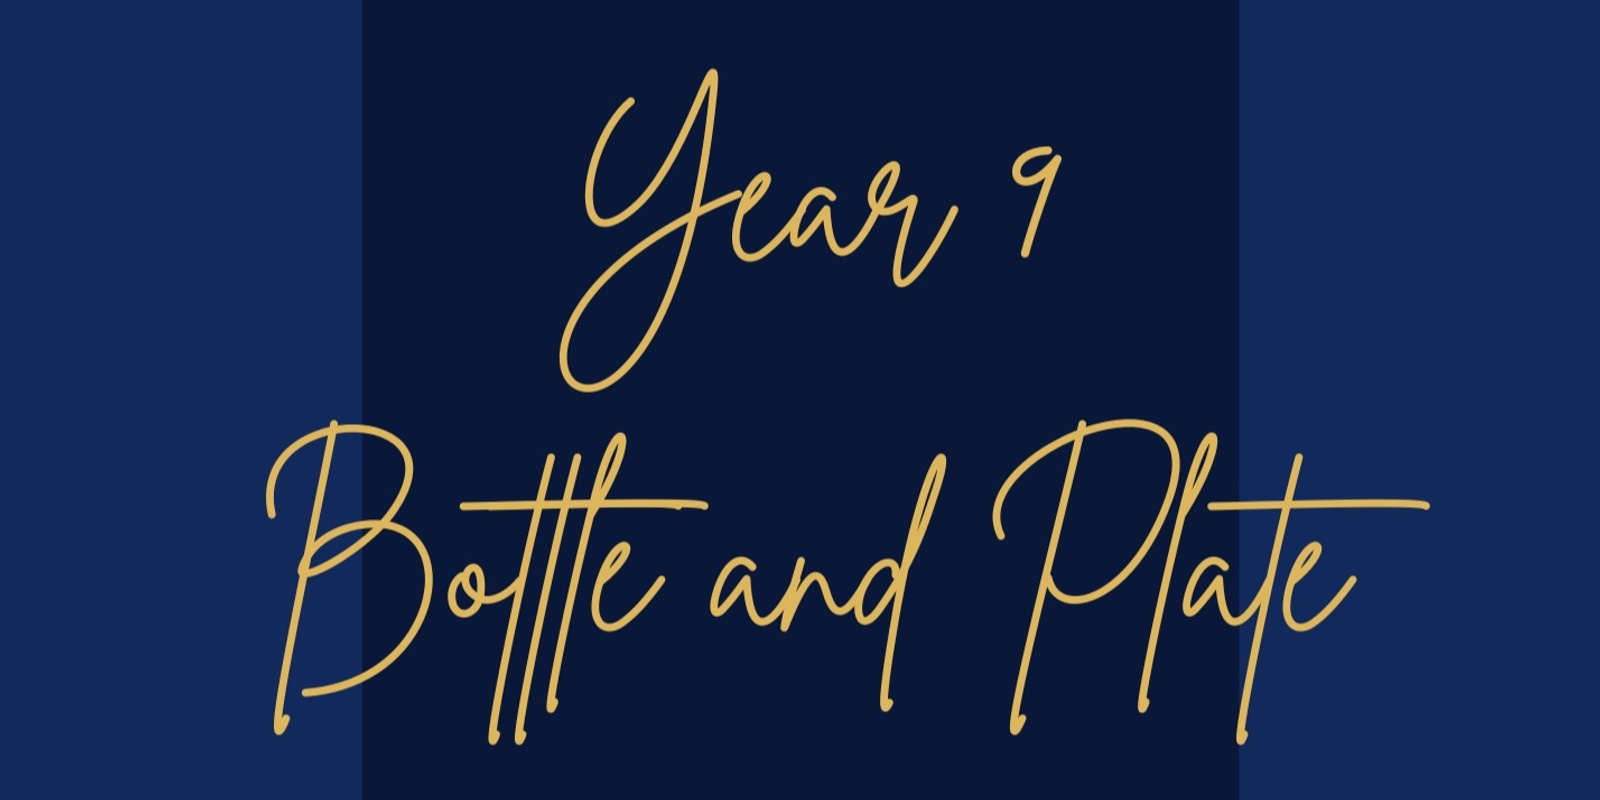 Banner image for Year 9 Bottle and Plate